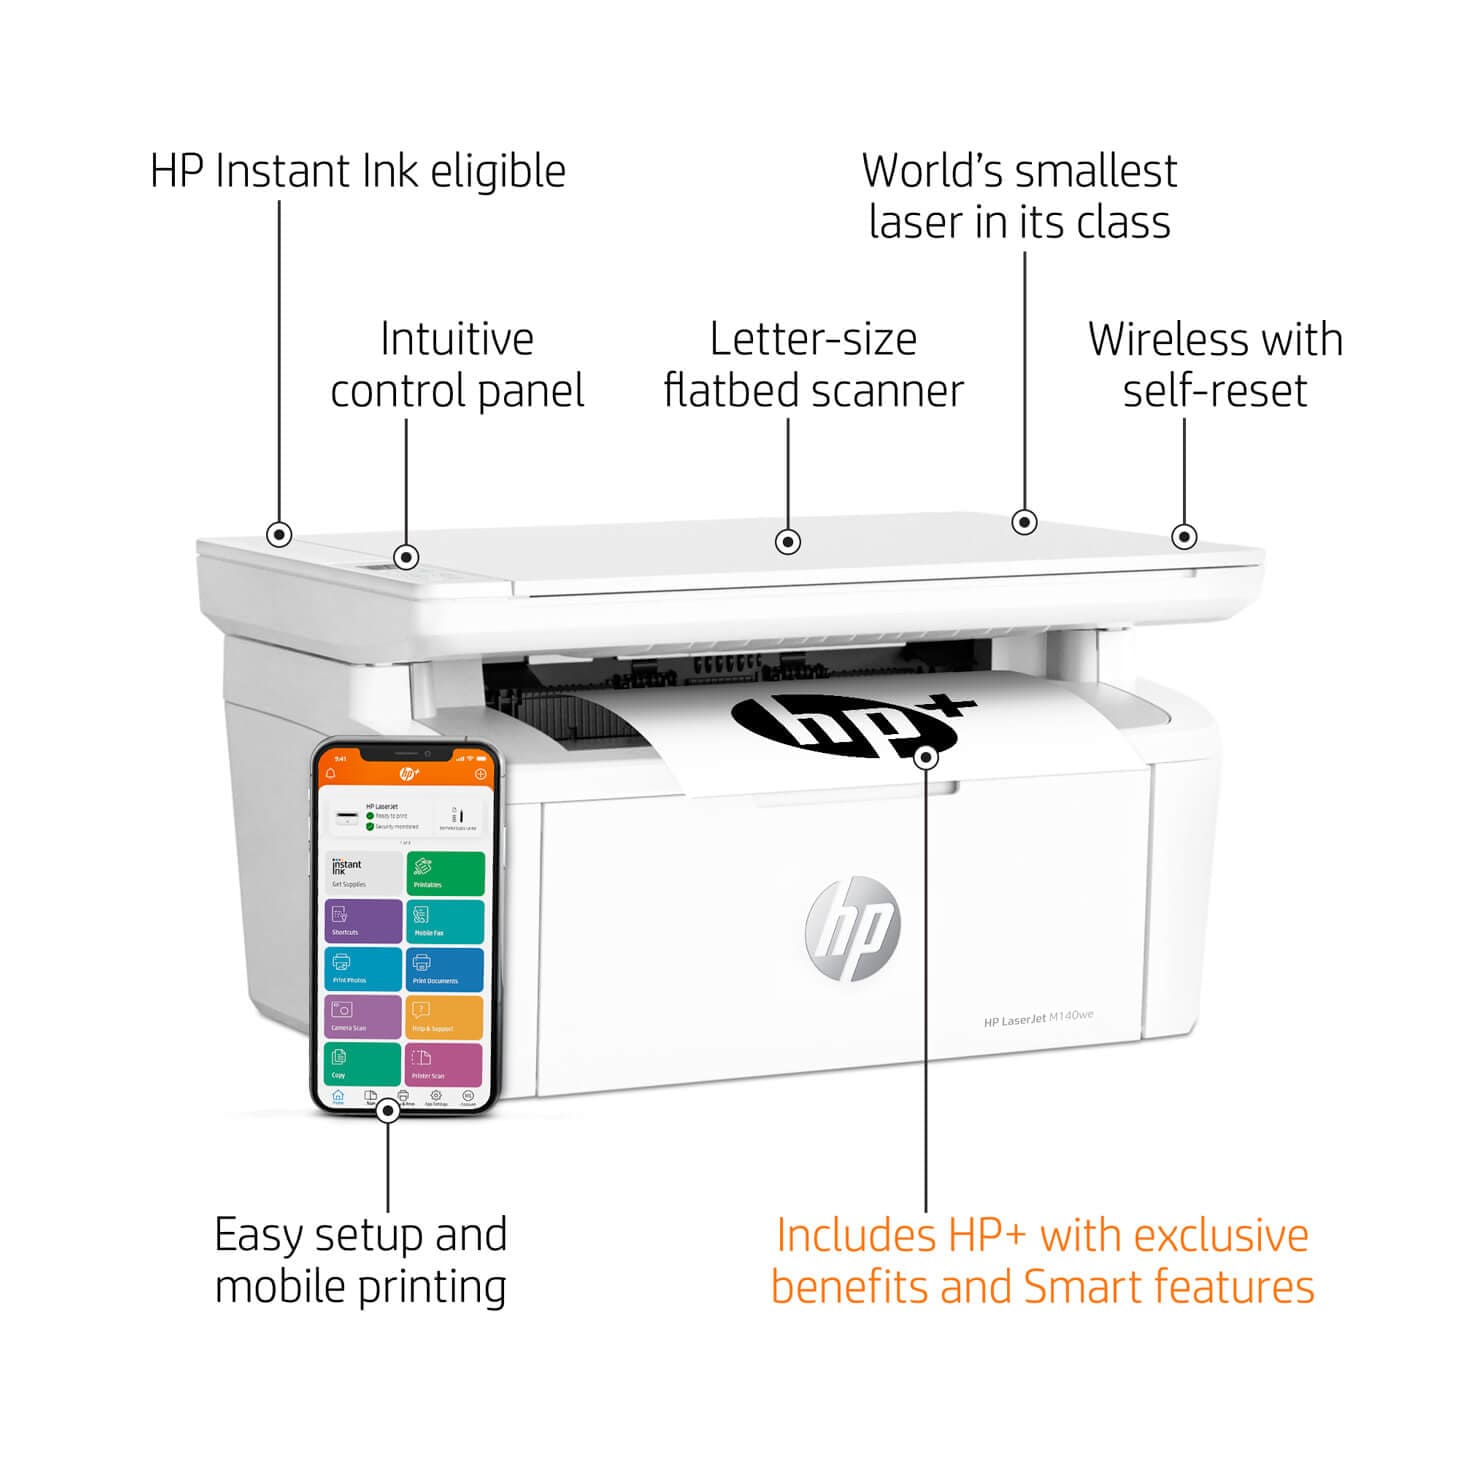 HP LaserJet M140we Printer with and 6 Months Ink